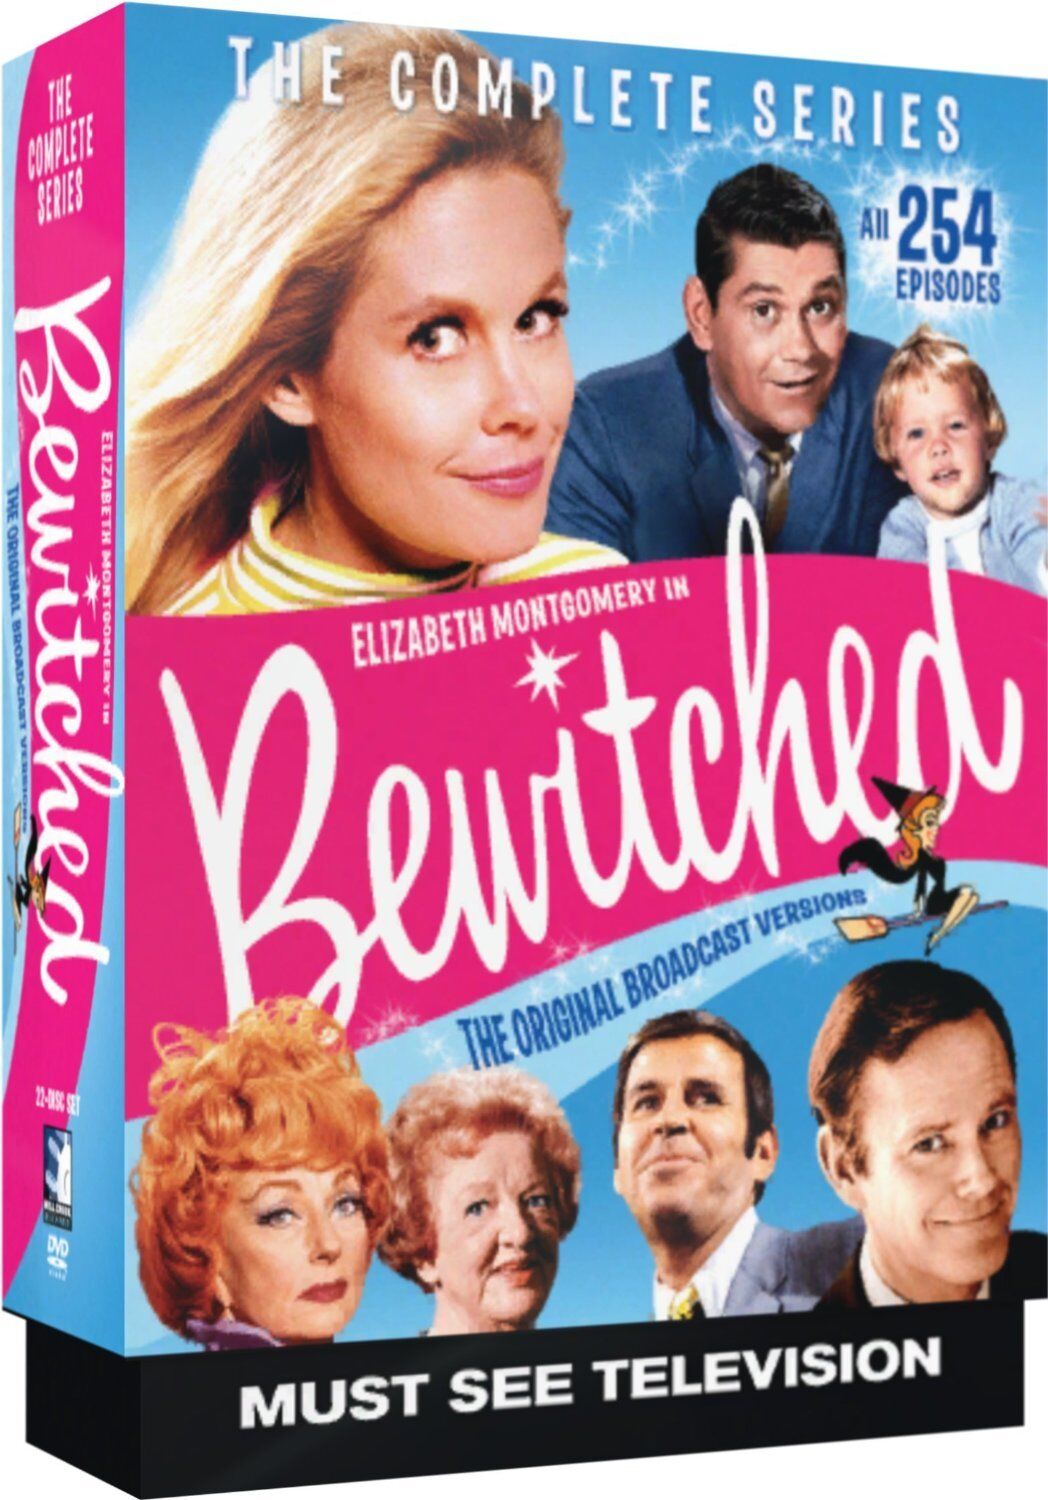 Bewitched - Complete Series Mill Creek Entertainment 683904111708